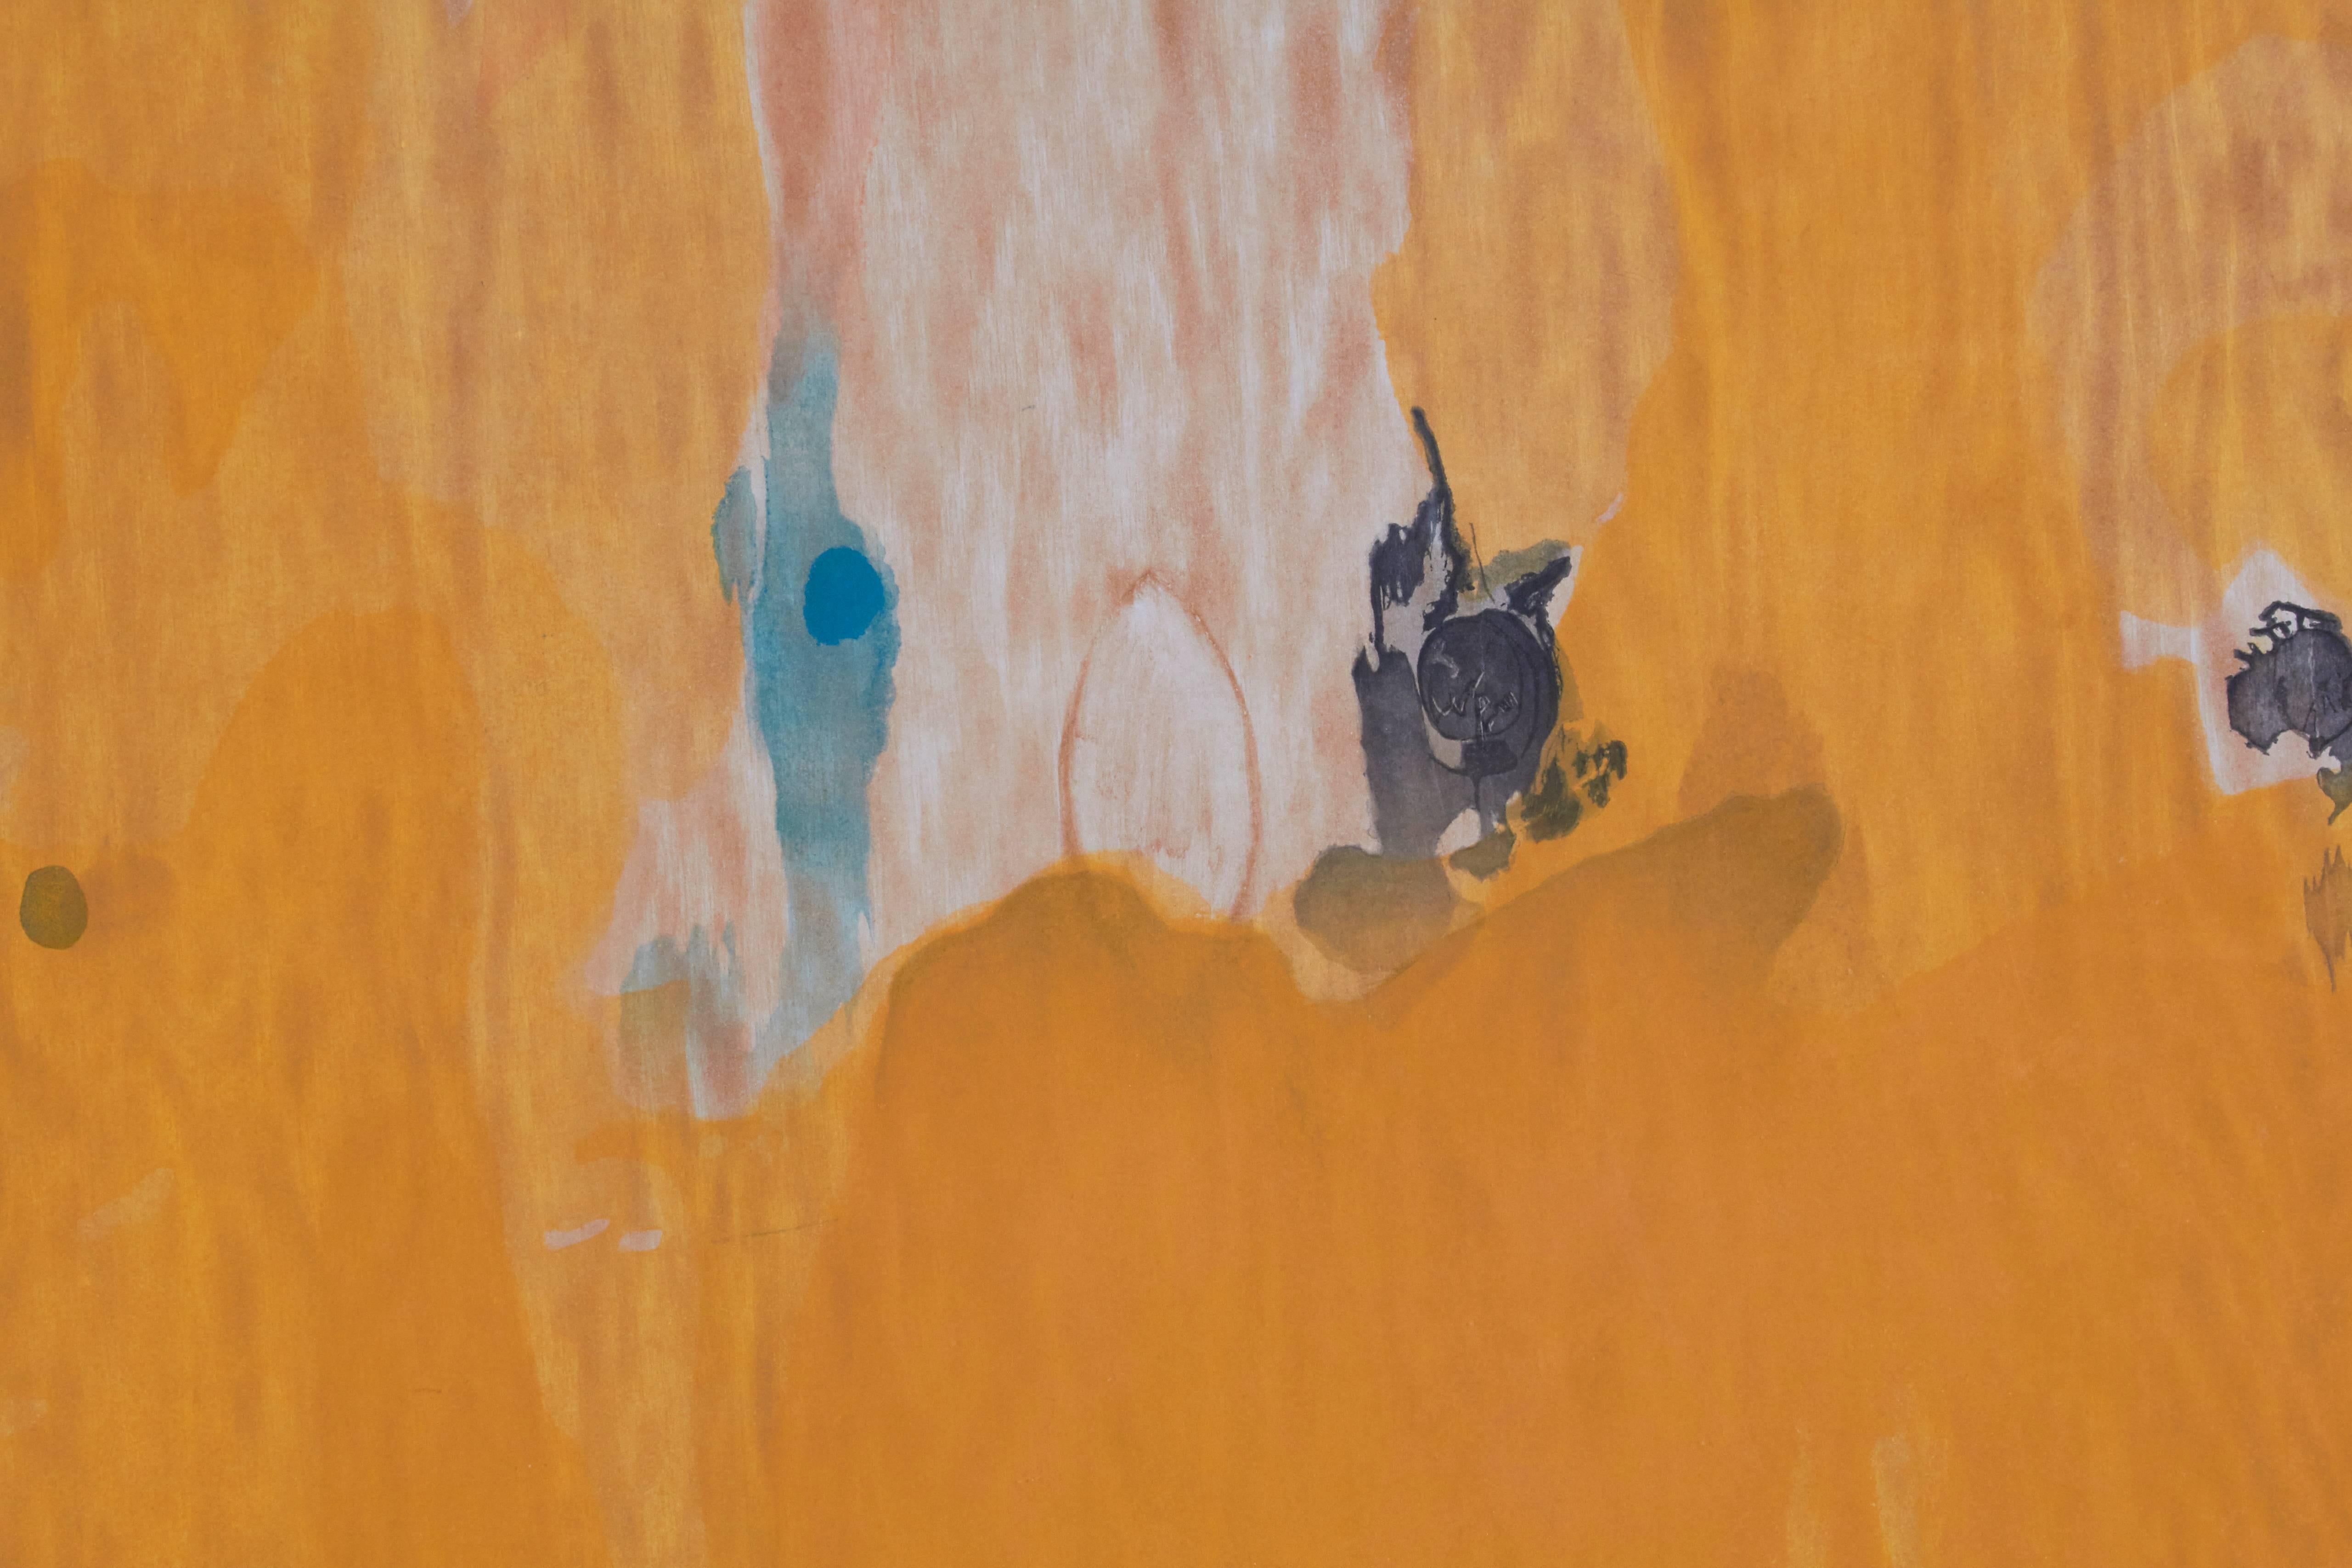 Helen Frankenthaler
Tales of Genji II
1998
Woodcut in colors on TGL handmade paper
Sheet: 47 1/8 x 42 1/8 inches
framed: 51 1/2 x 46 1/2 inches
Edition 14 of 14 AP
Signed and numbered in pencil 